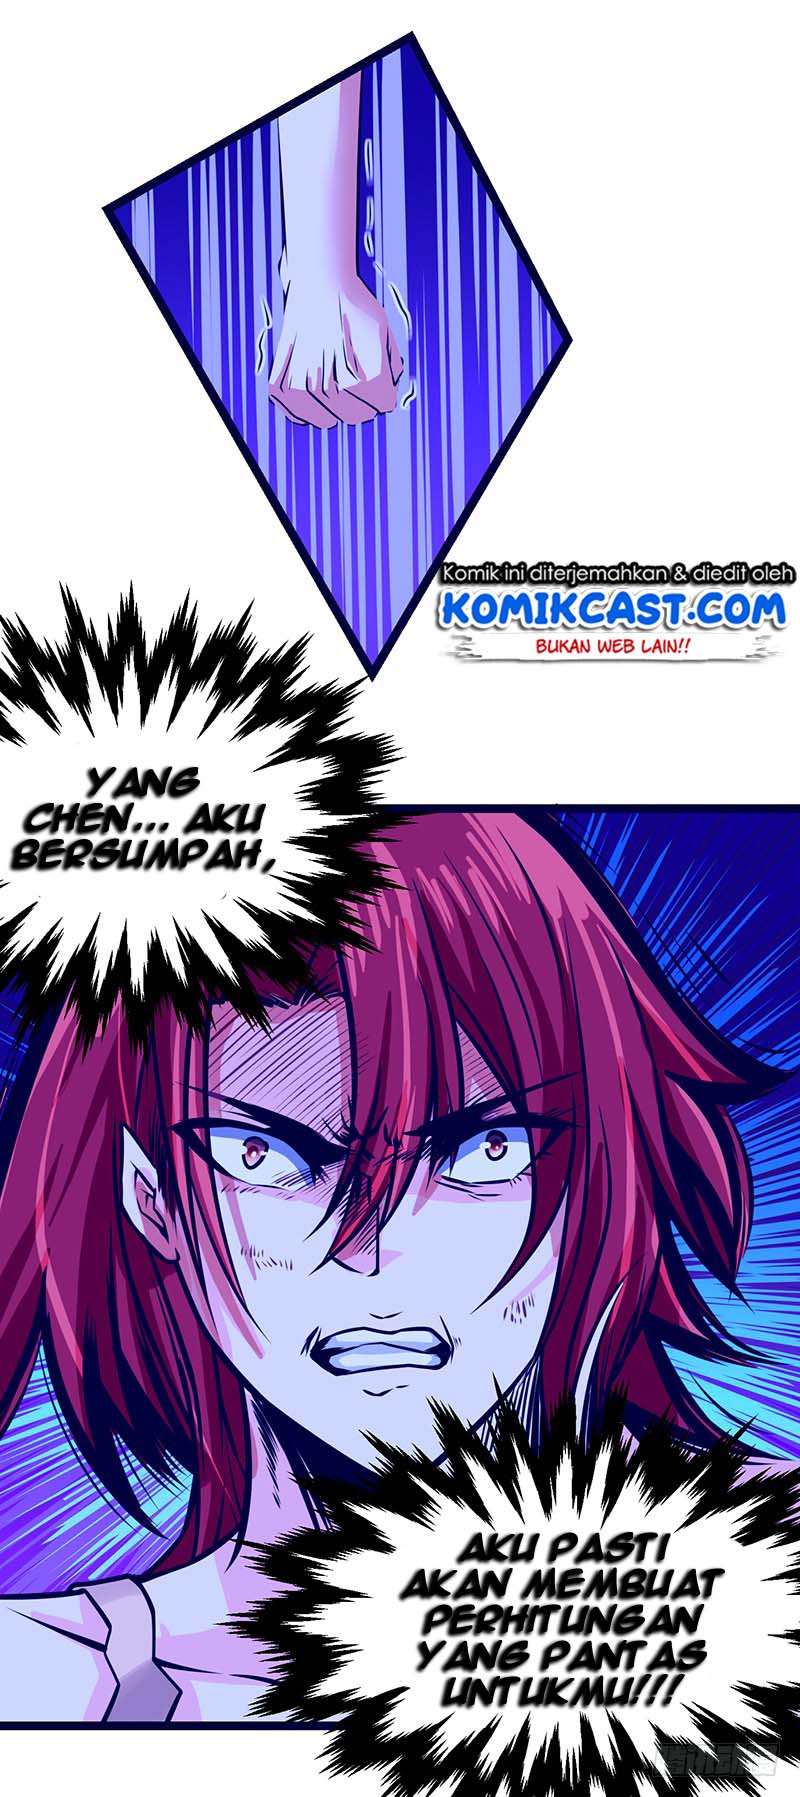 First Rate Master Chapter 49